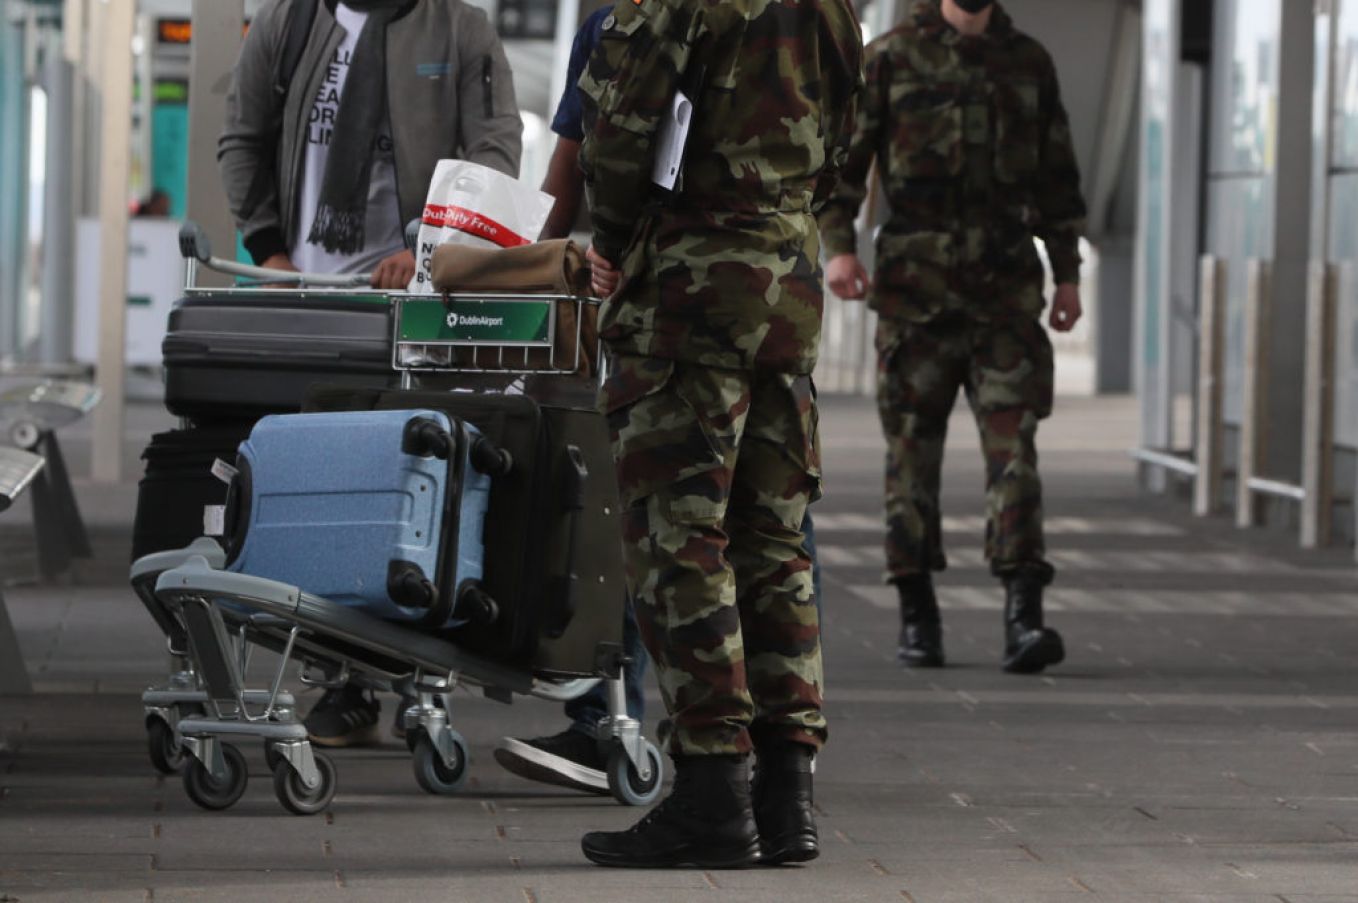 Members Of The Defence Forces Direct Passengers Arriving At Dublin Airport. Photo: Pa Images.